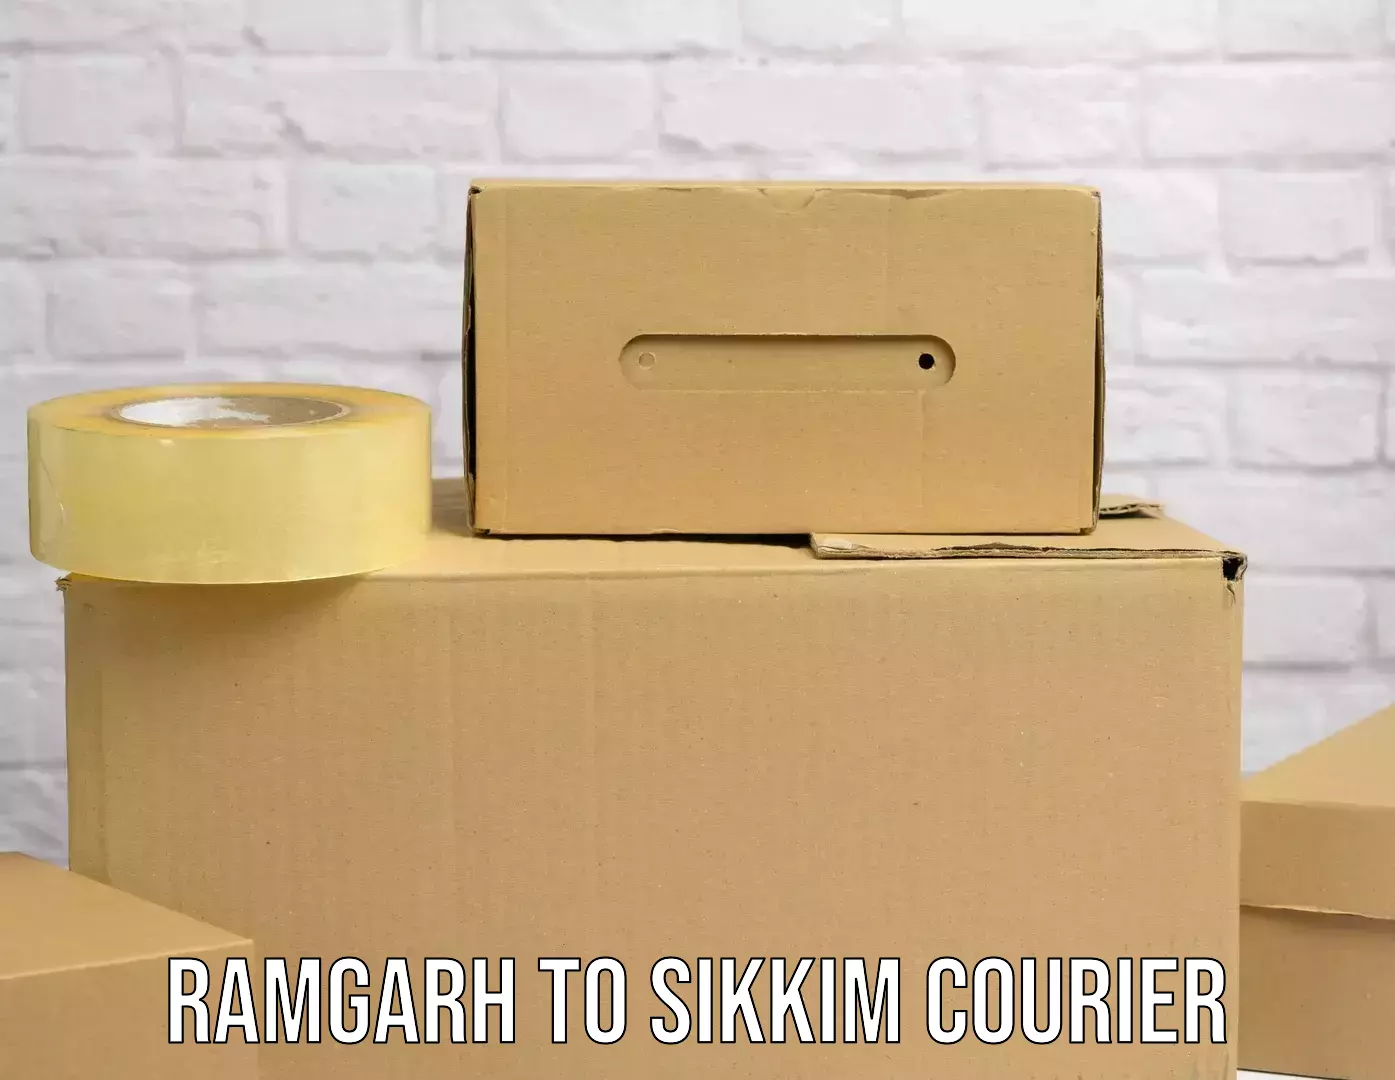 Courier service partnerships Ramgarh to Sikkim